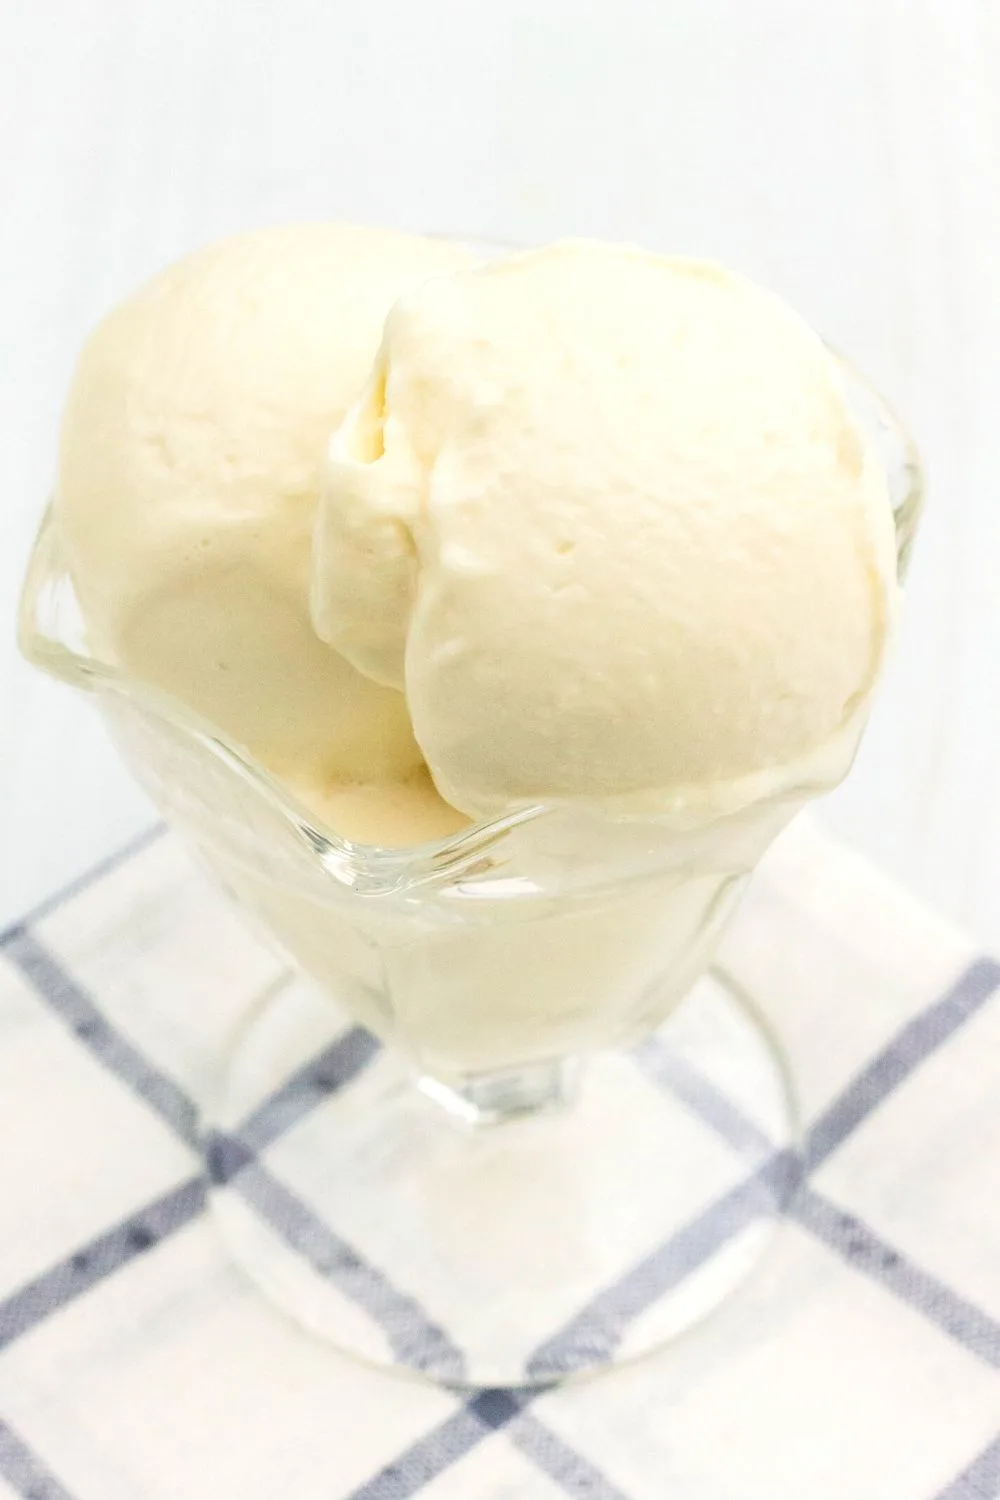 close-up view of two scoops of cottage cheese ice cream in a glass ice cream cup